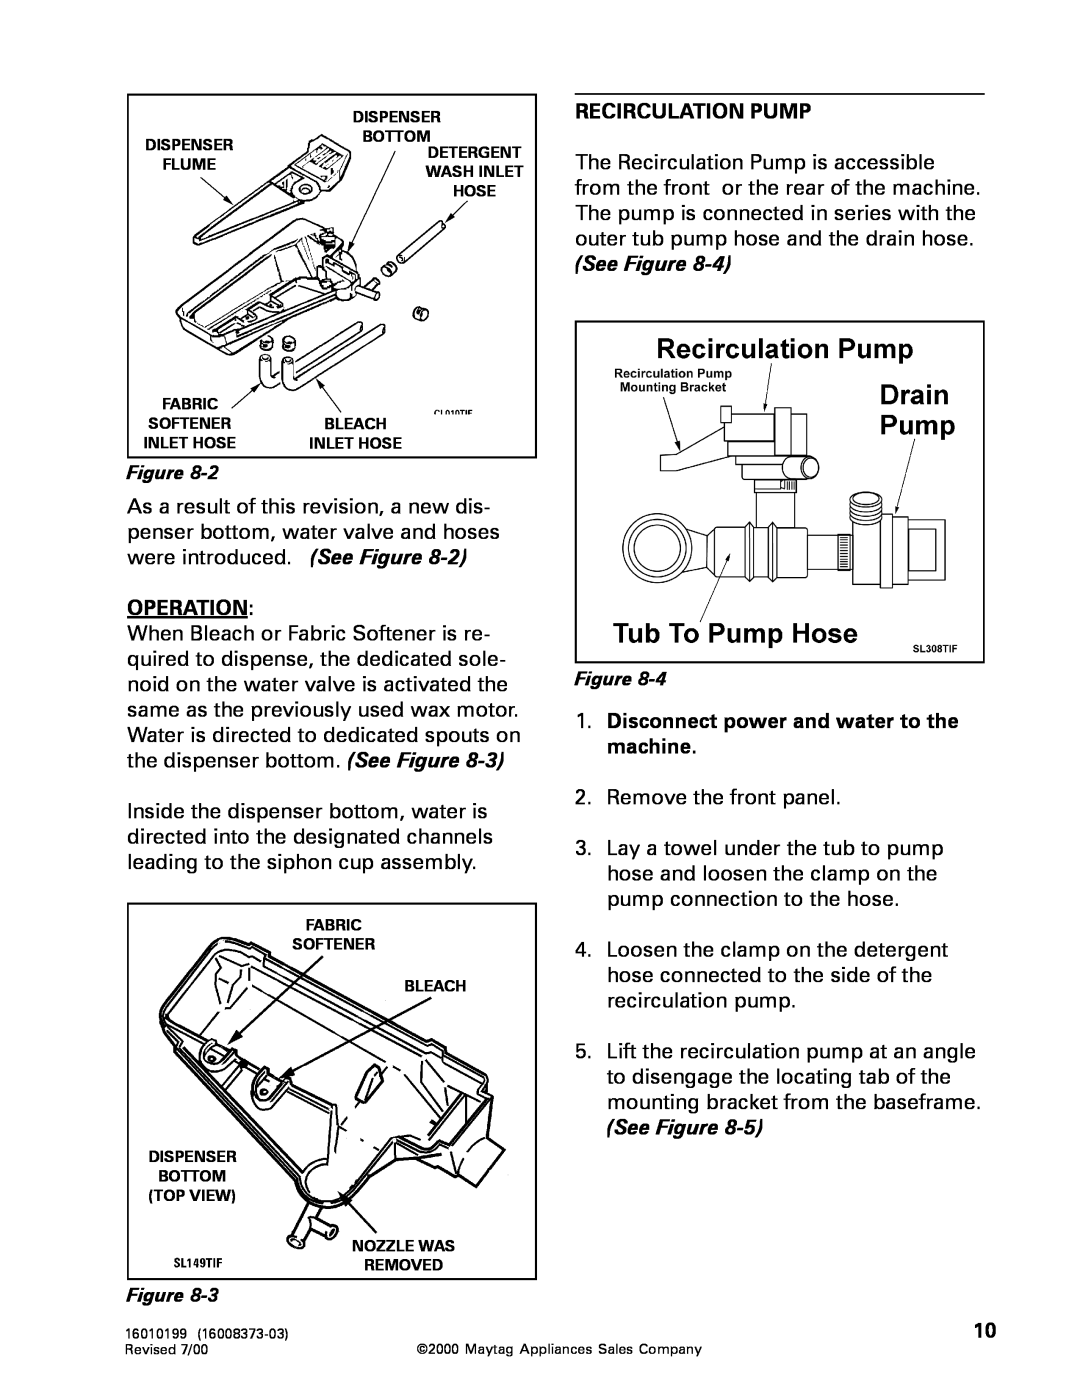 Whirlpool MAH3000 service manual Operation, See Figure, Disconnect power and water to the machine, Recirculation Pump 